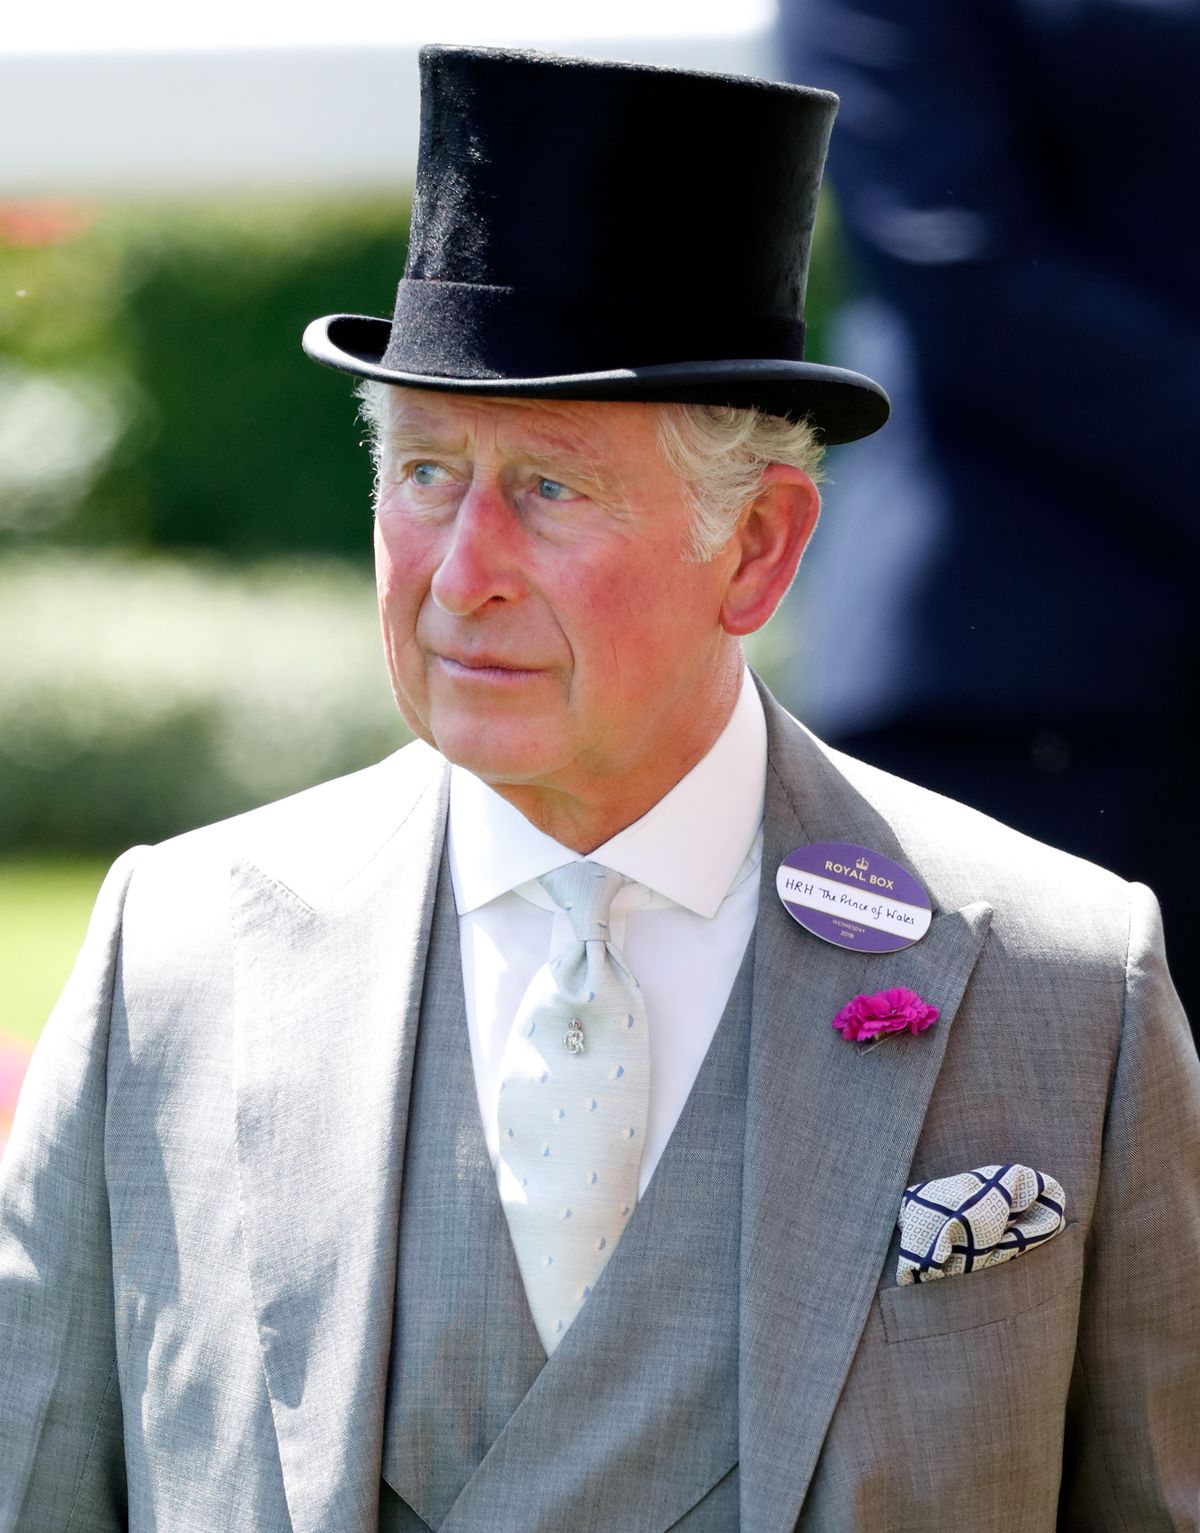 Prince Charles at day 2 of Royal Ascot at Ascot Racecourse on June 20, 2018 | Getty Images